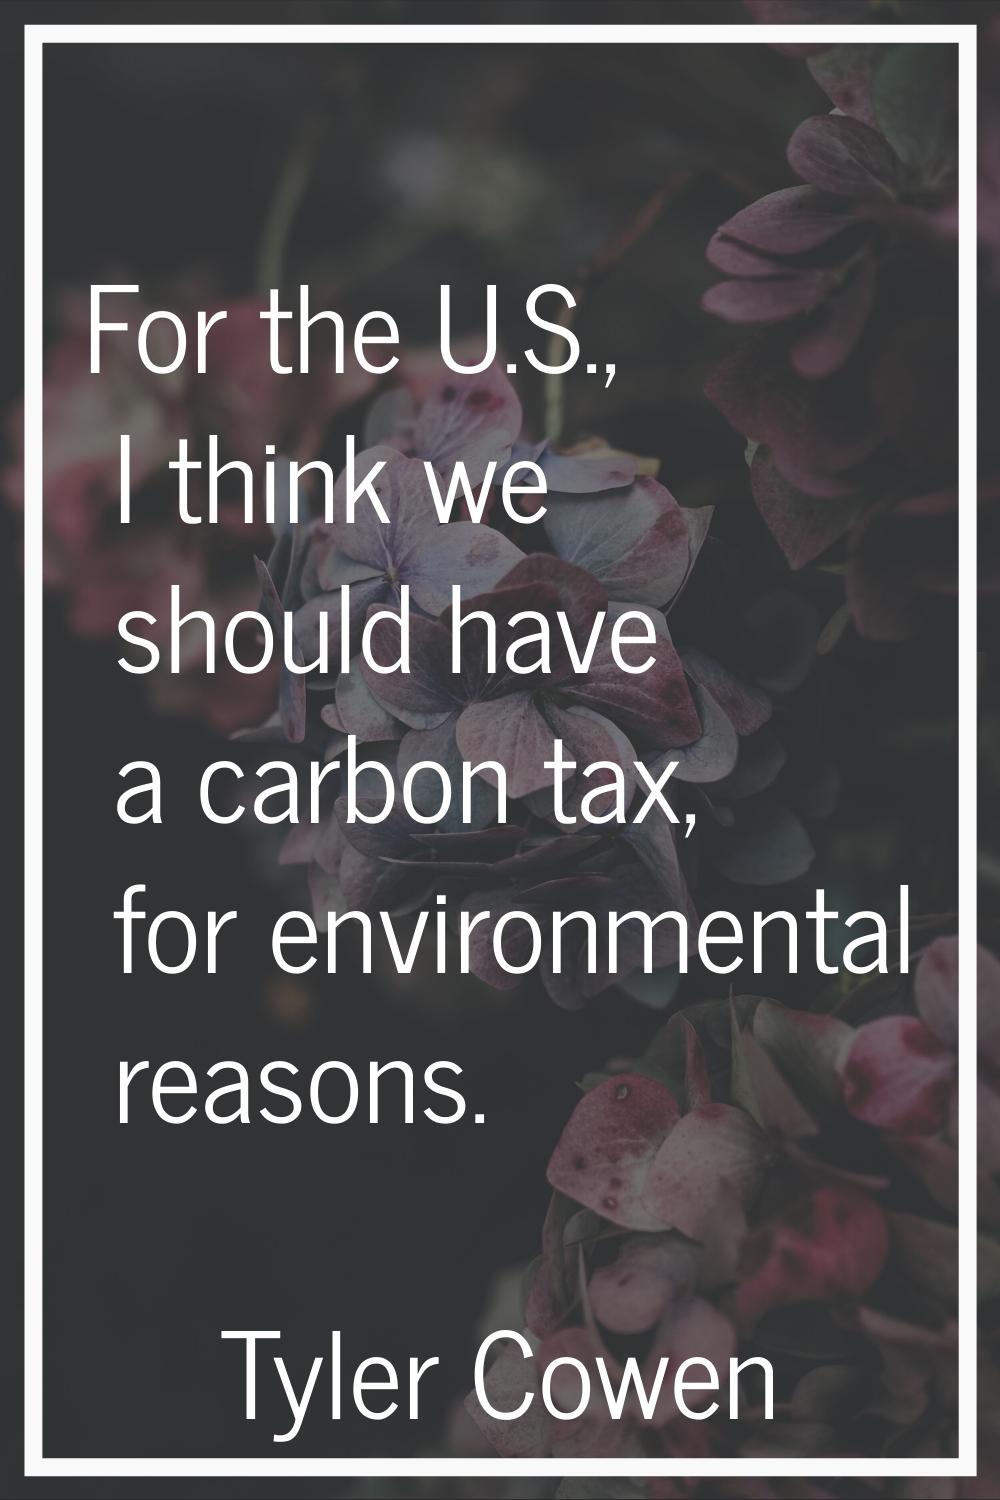 For the U.S., I think we should have a carbon tax, for environmental reasons.